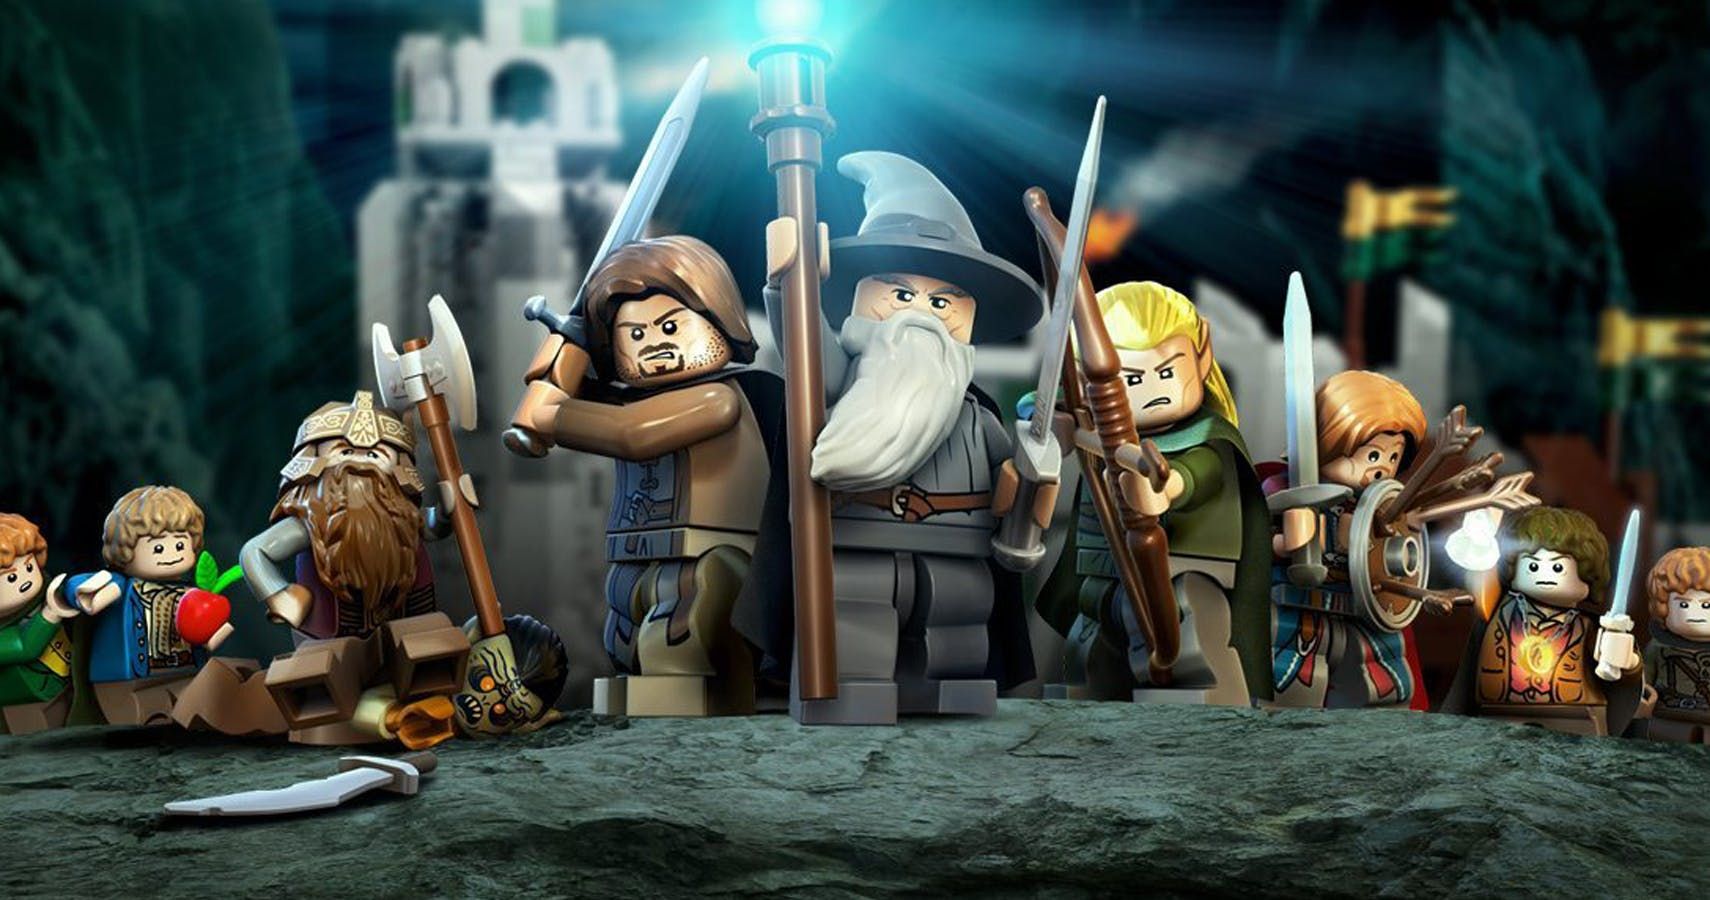 Pack Shadow Of Mordor War + Lego Lords Of The Rings E Hobbit